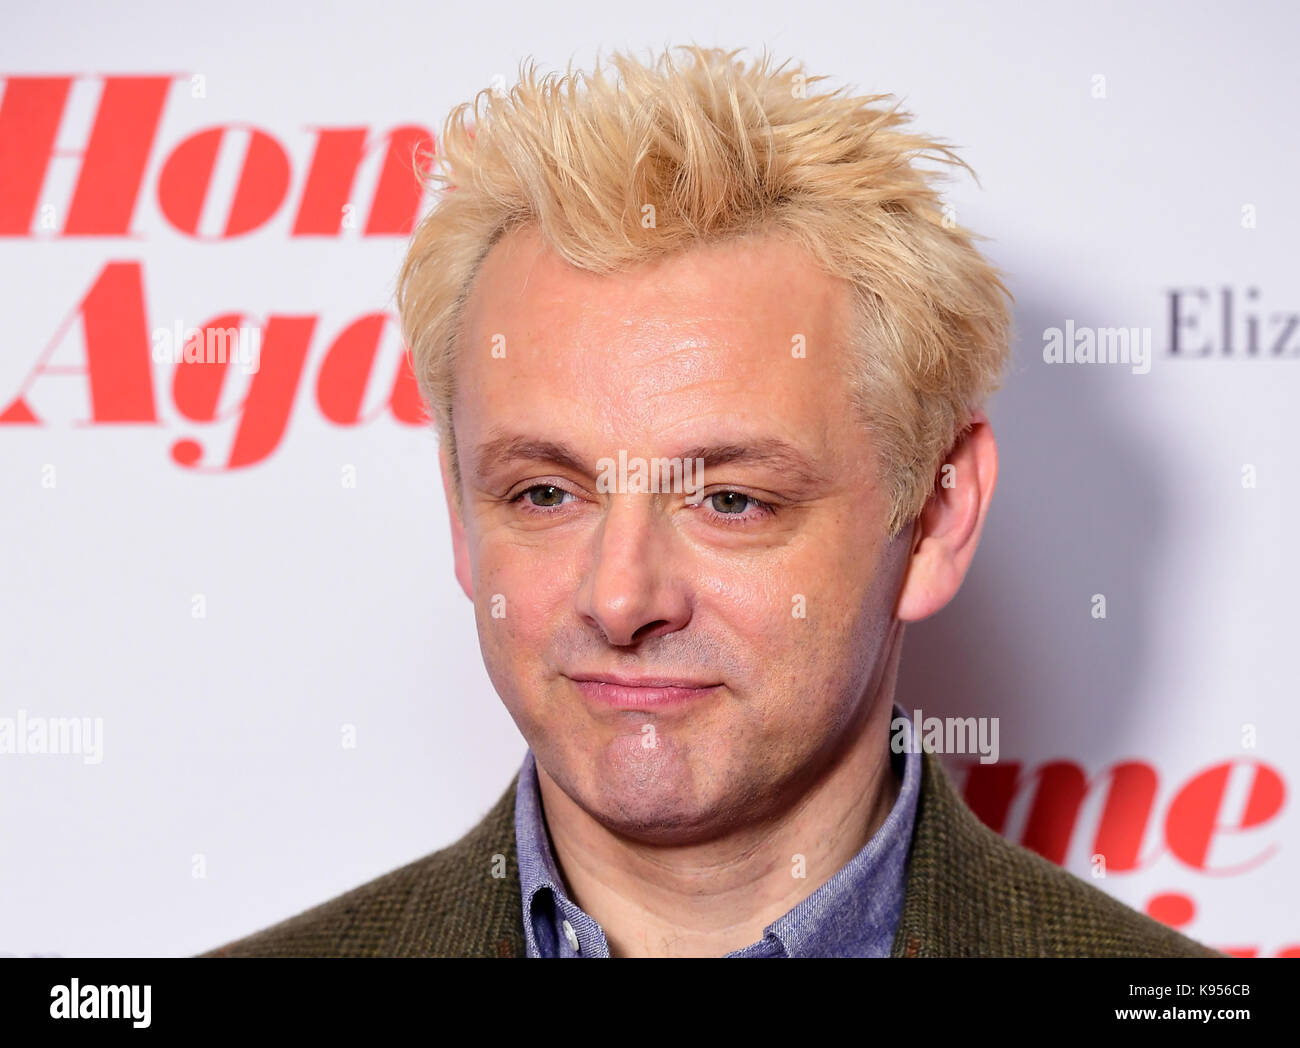 Michael Sheen attending a screening of Home Again in London. Picture Date: Thursday 21 September. Photo credit should read: Ian West/PA Wire Stock Photo